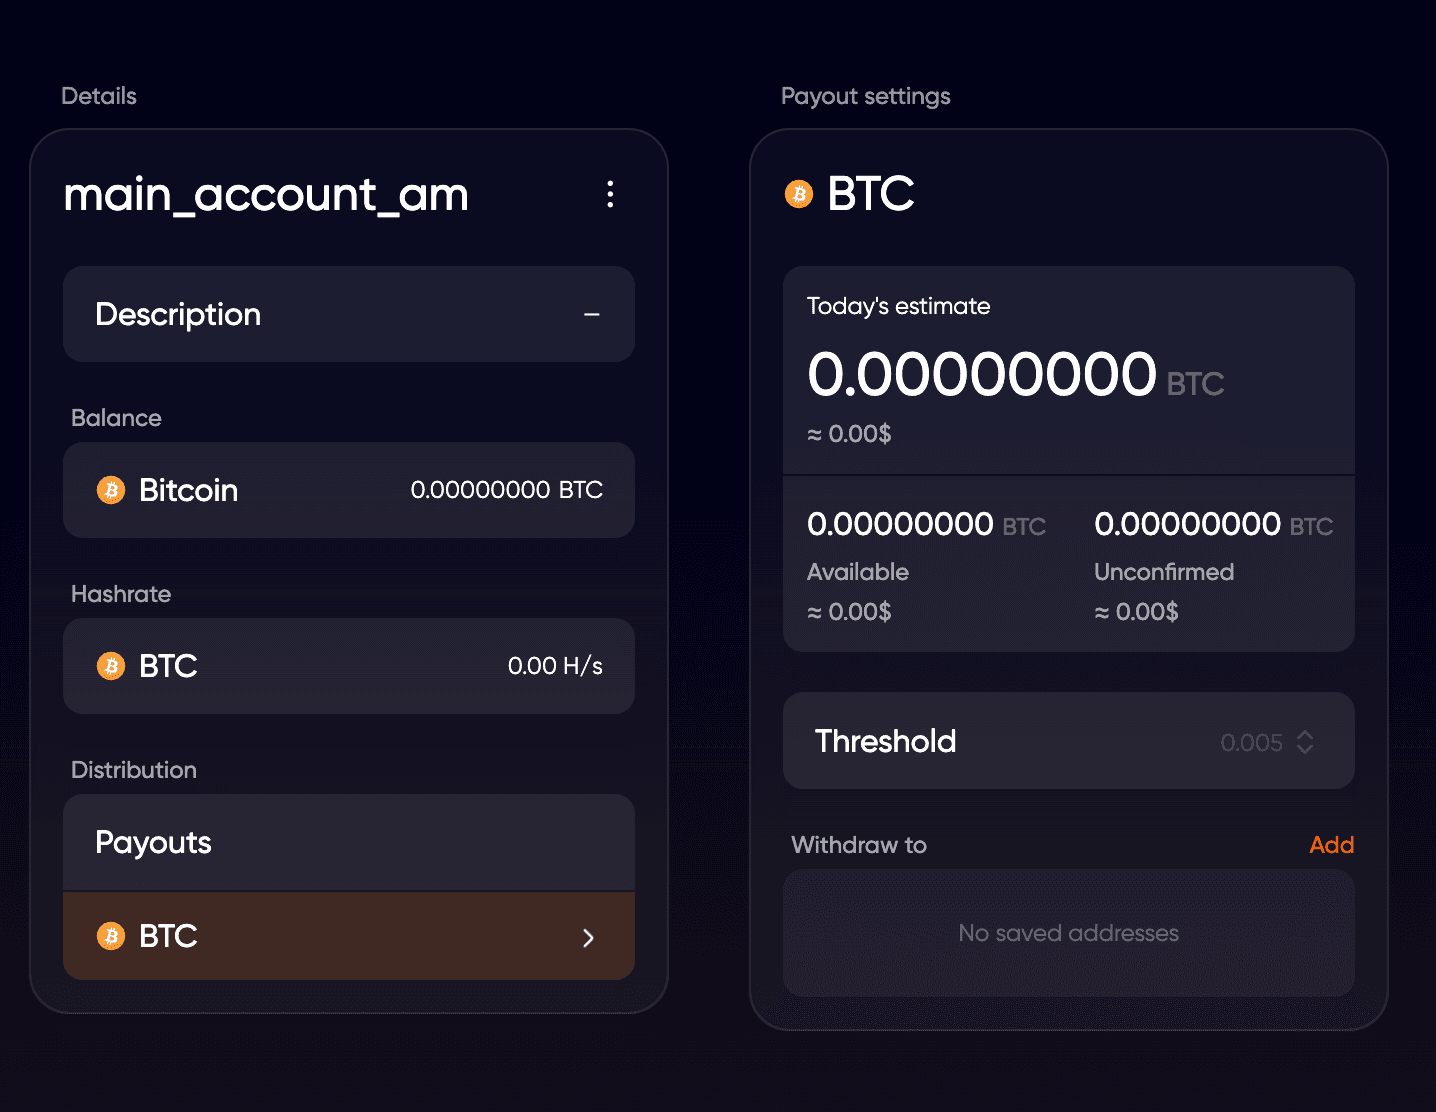 mining_account_payouts_settings.png